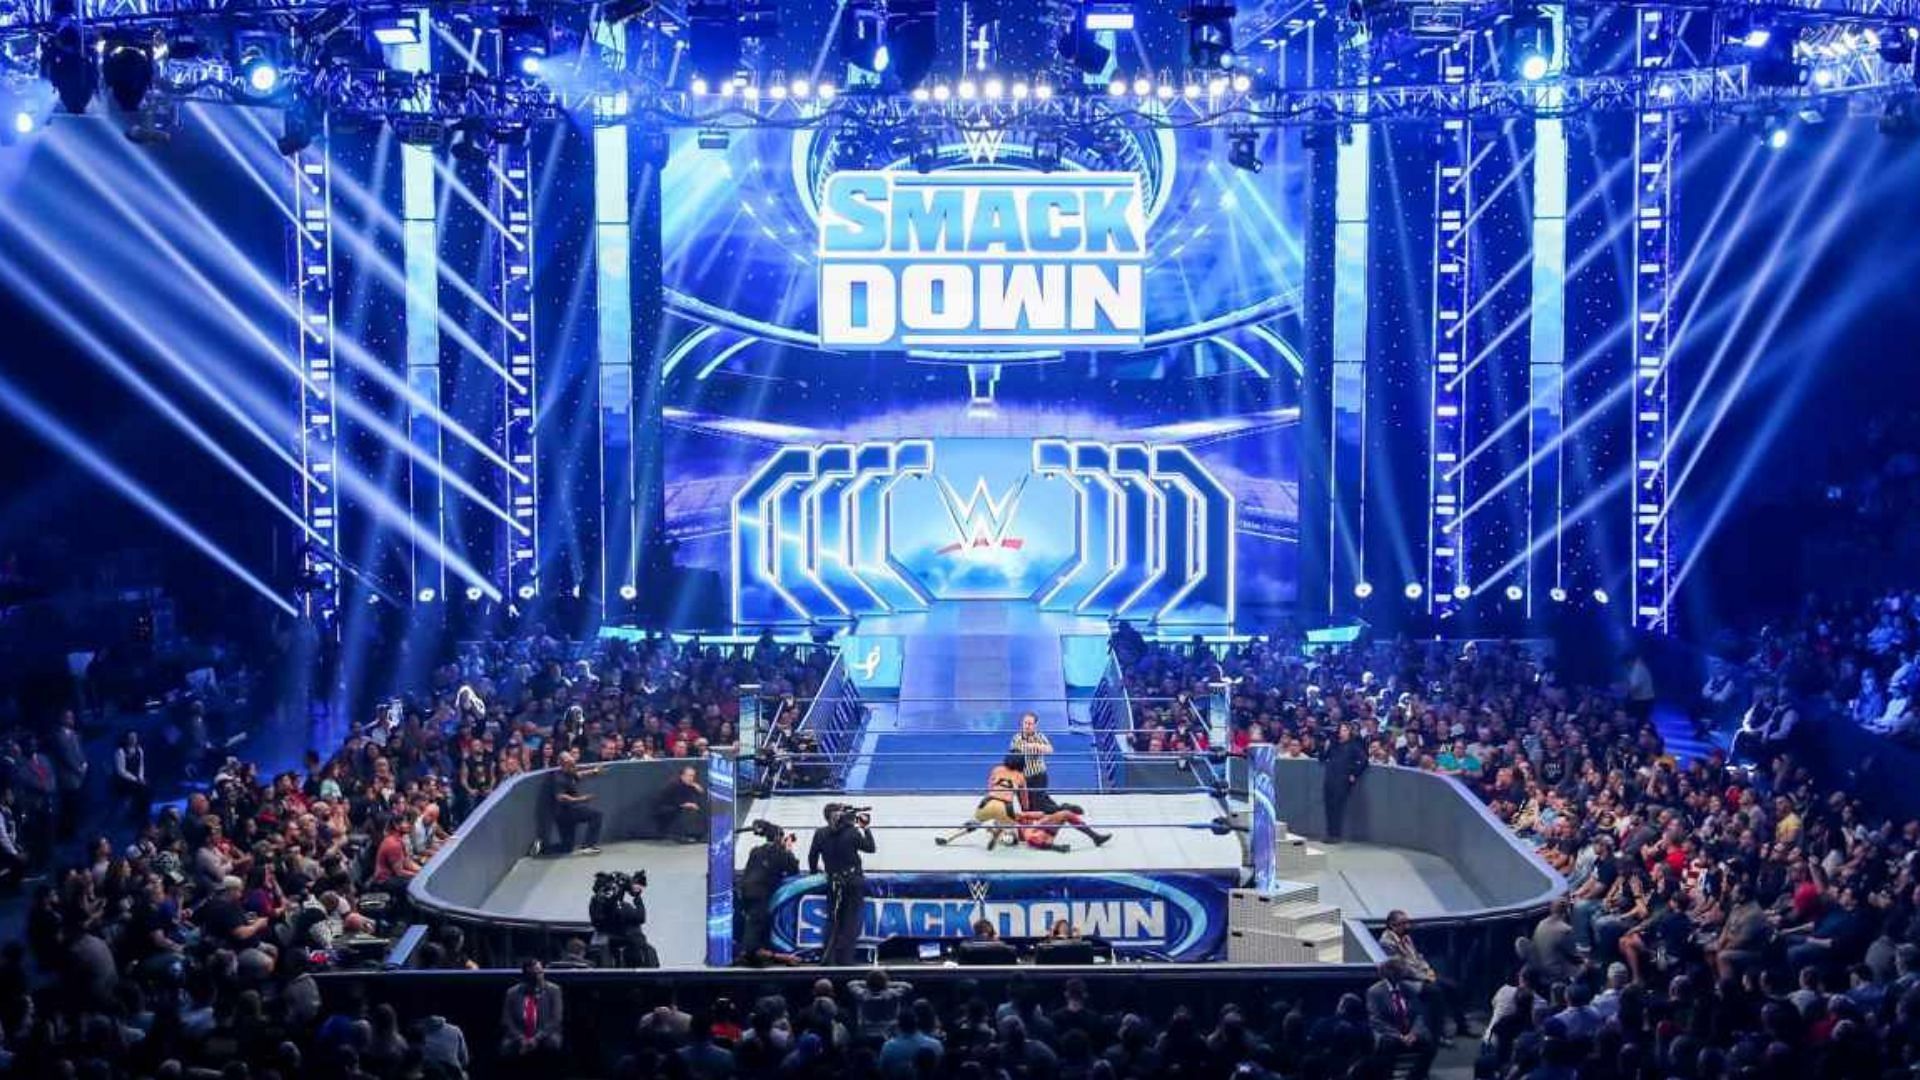 SmackDown will air live tonight in Chicago.